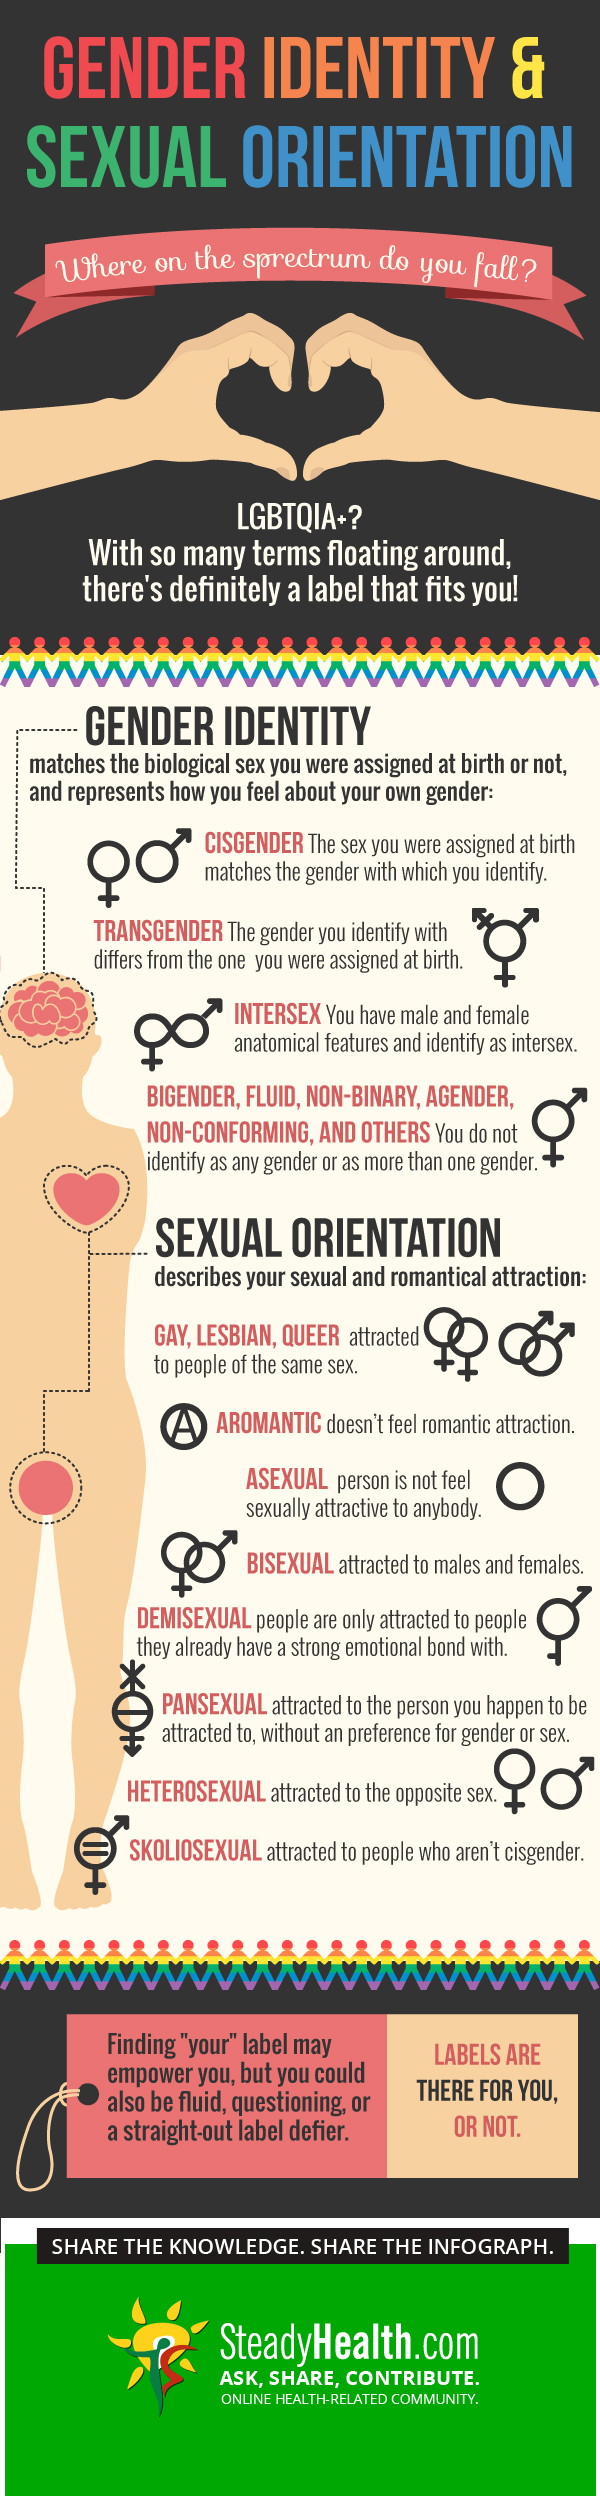 sexual identity articles